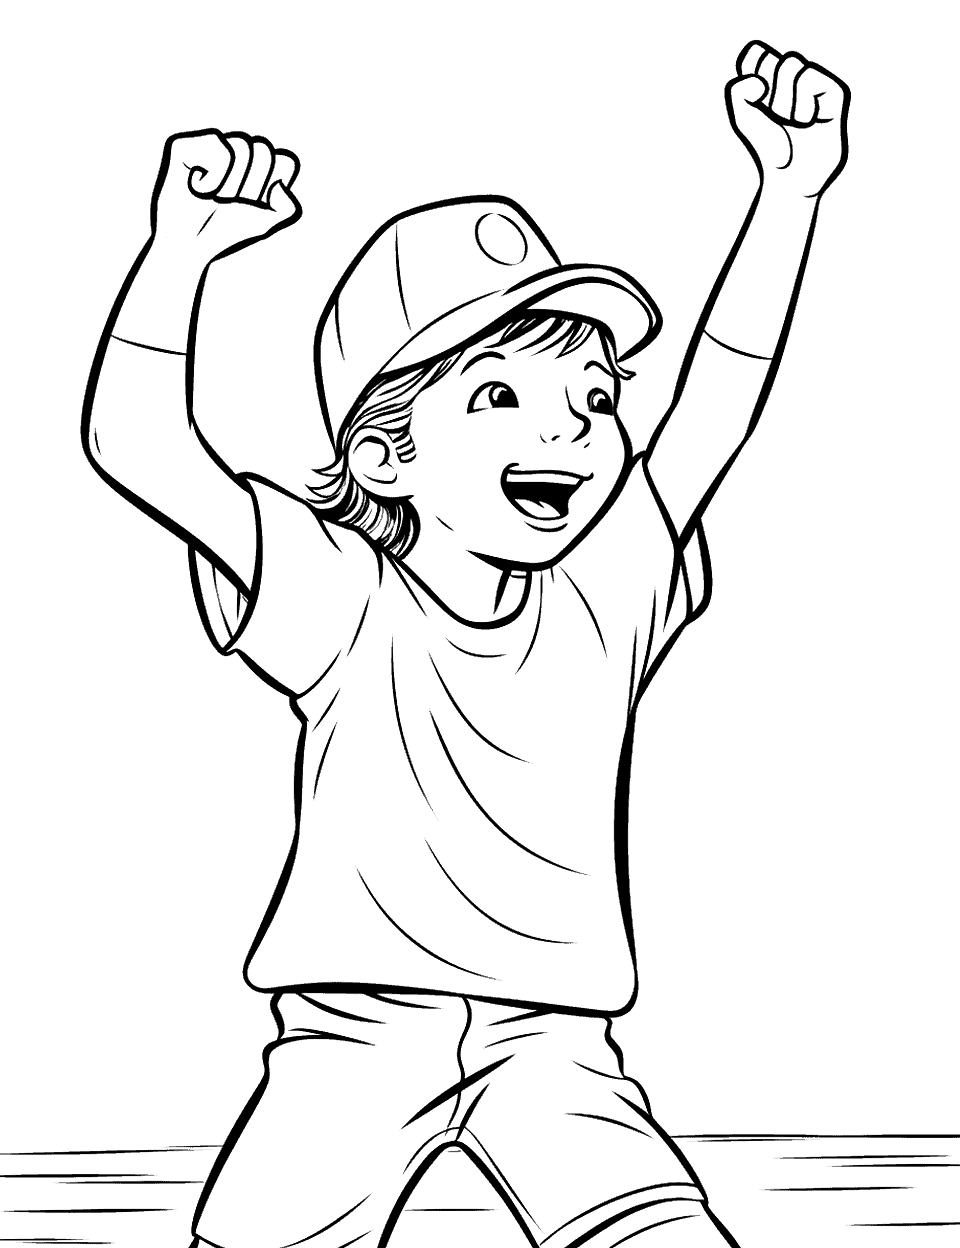 Fan Fever Baseball Coloring Page - A young fan wearing a cap and jersey and cheering.